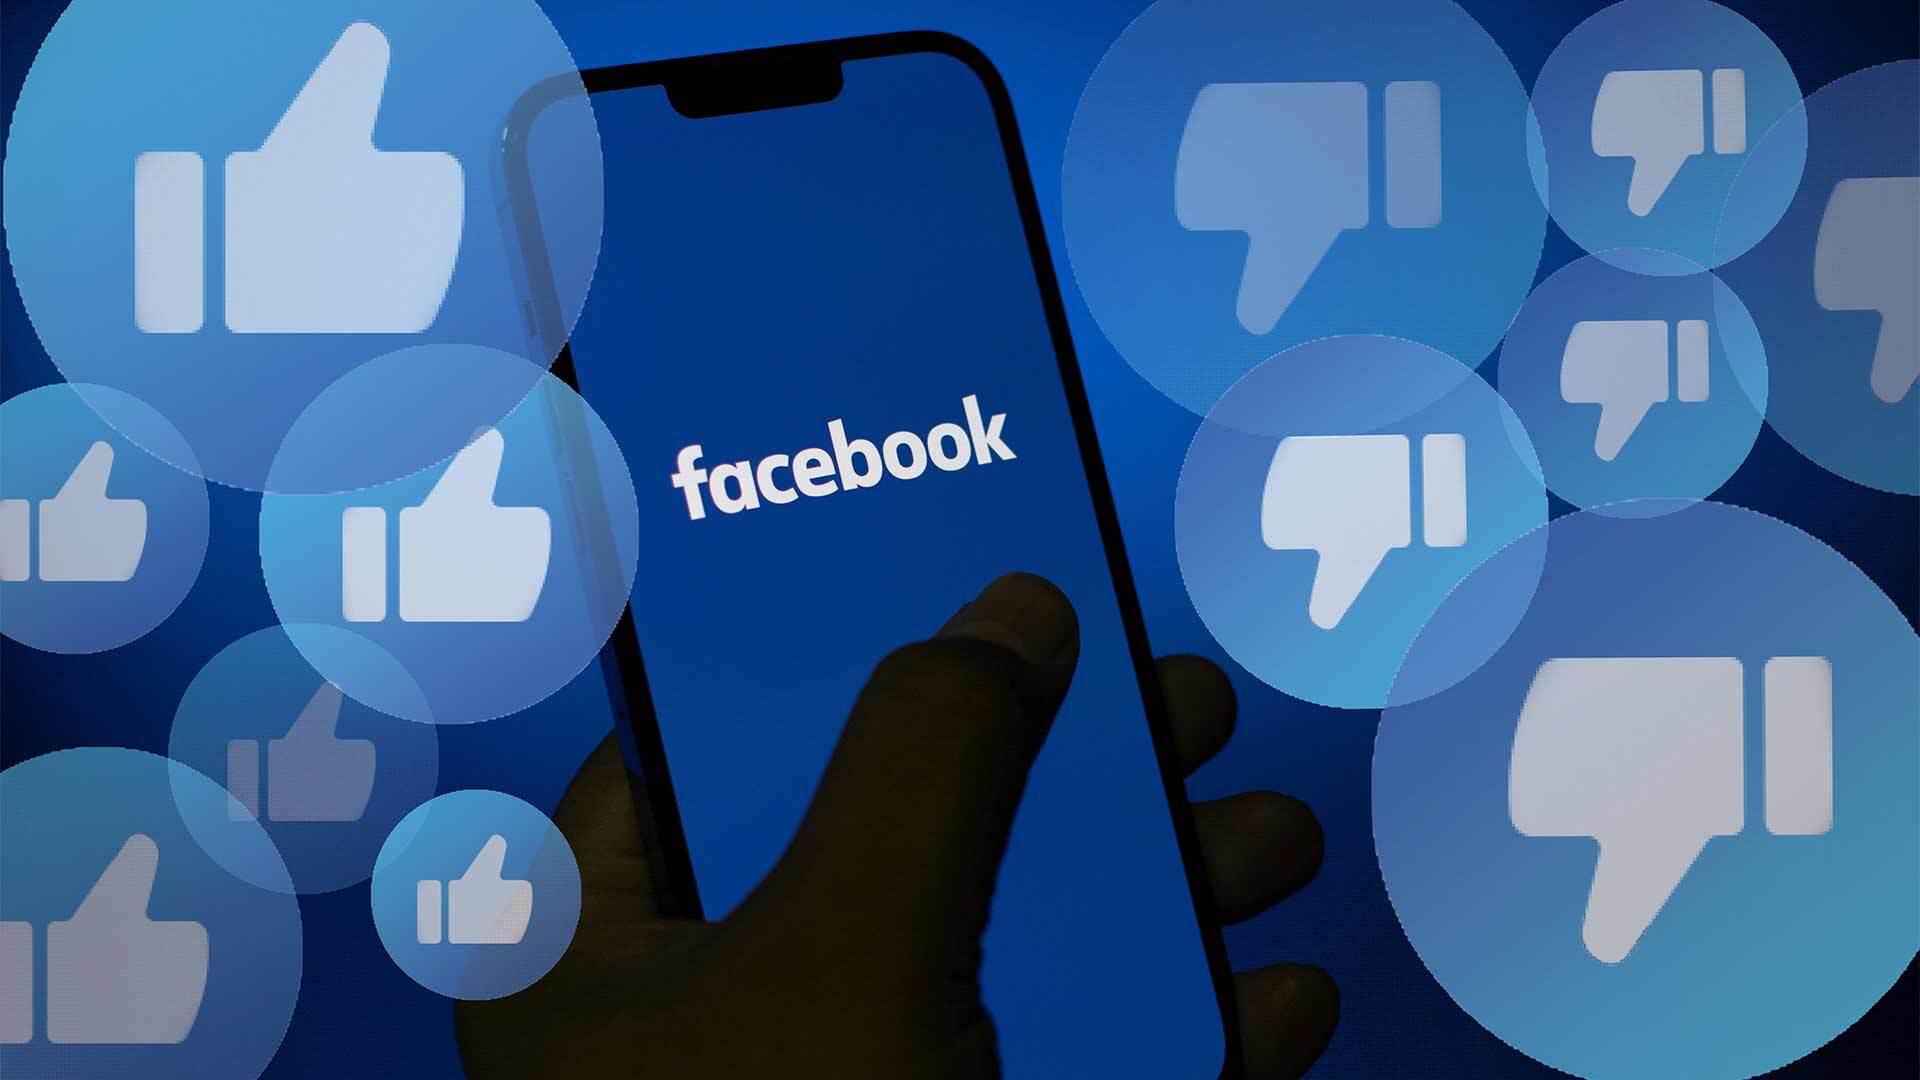 Facebook on smartphone with like and dislike icons